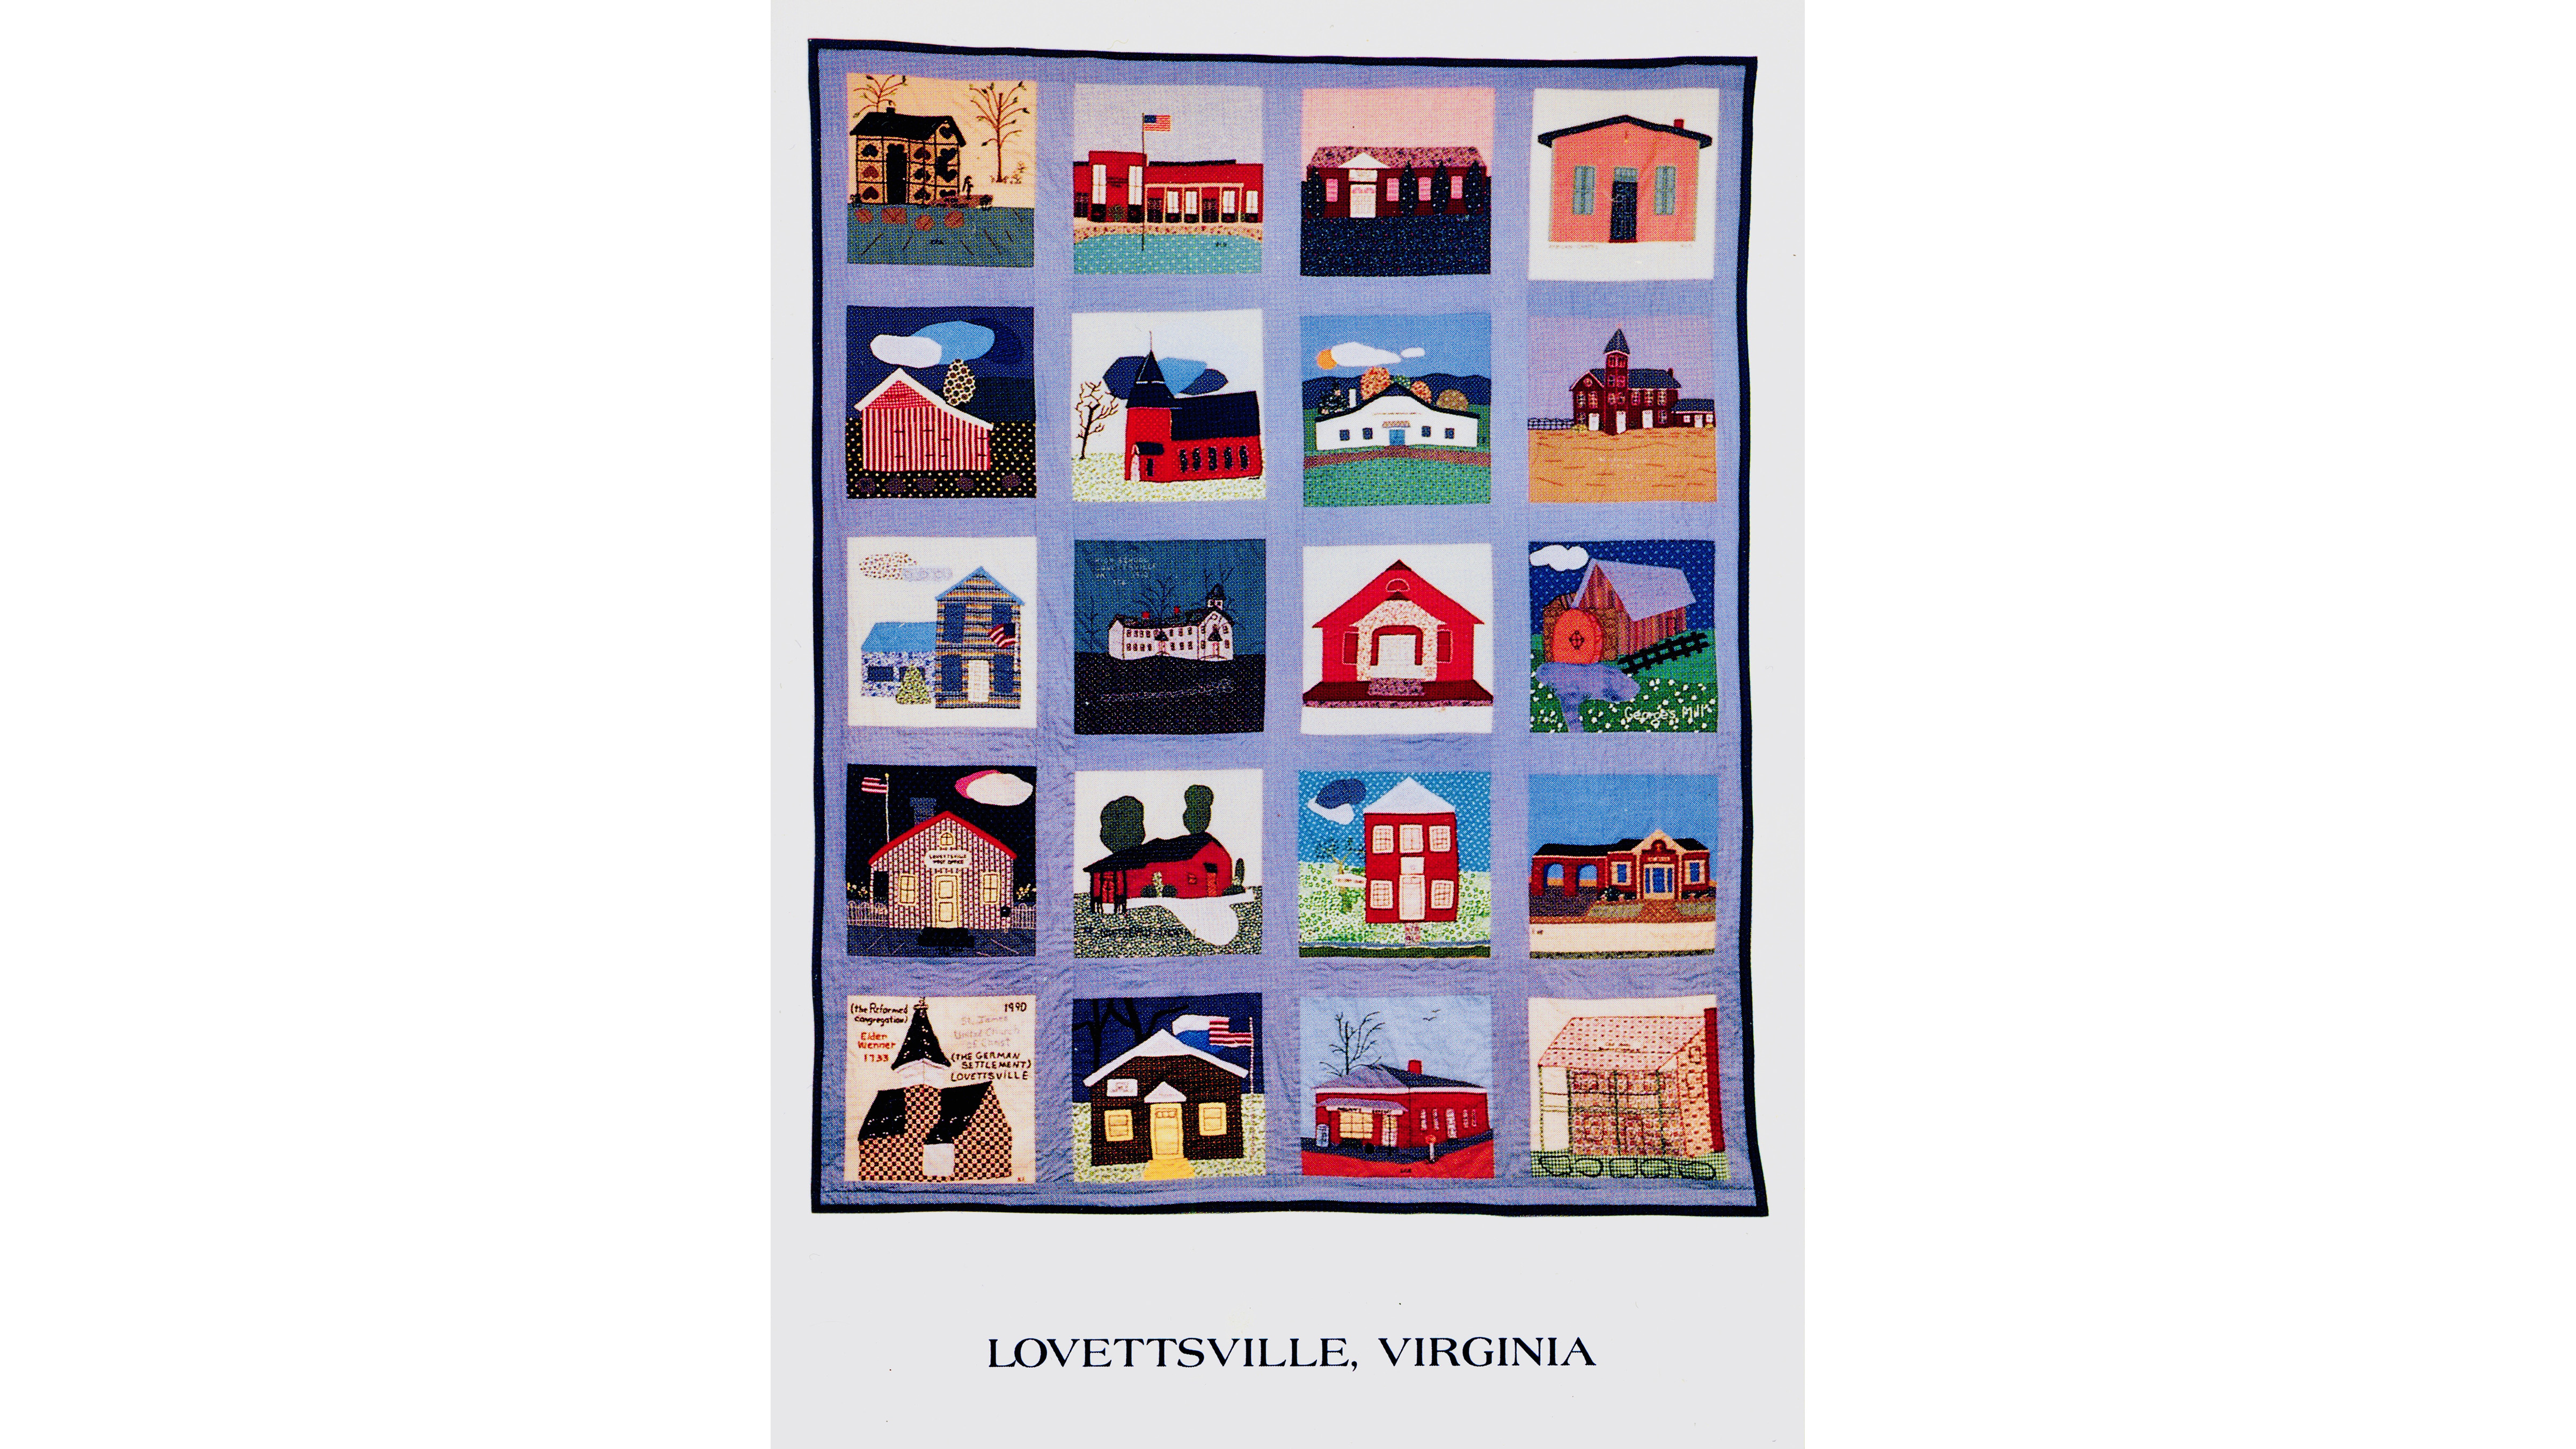 Thumbnail for the post titled: The Meaning Behind the Lovettsville Community Quilt (1990)